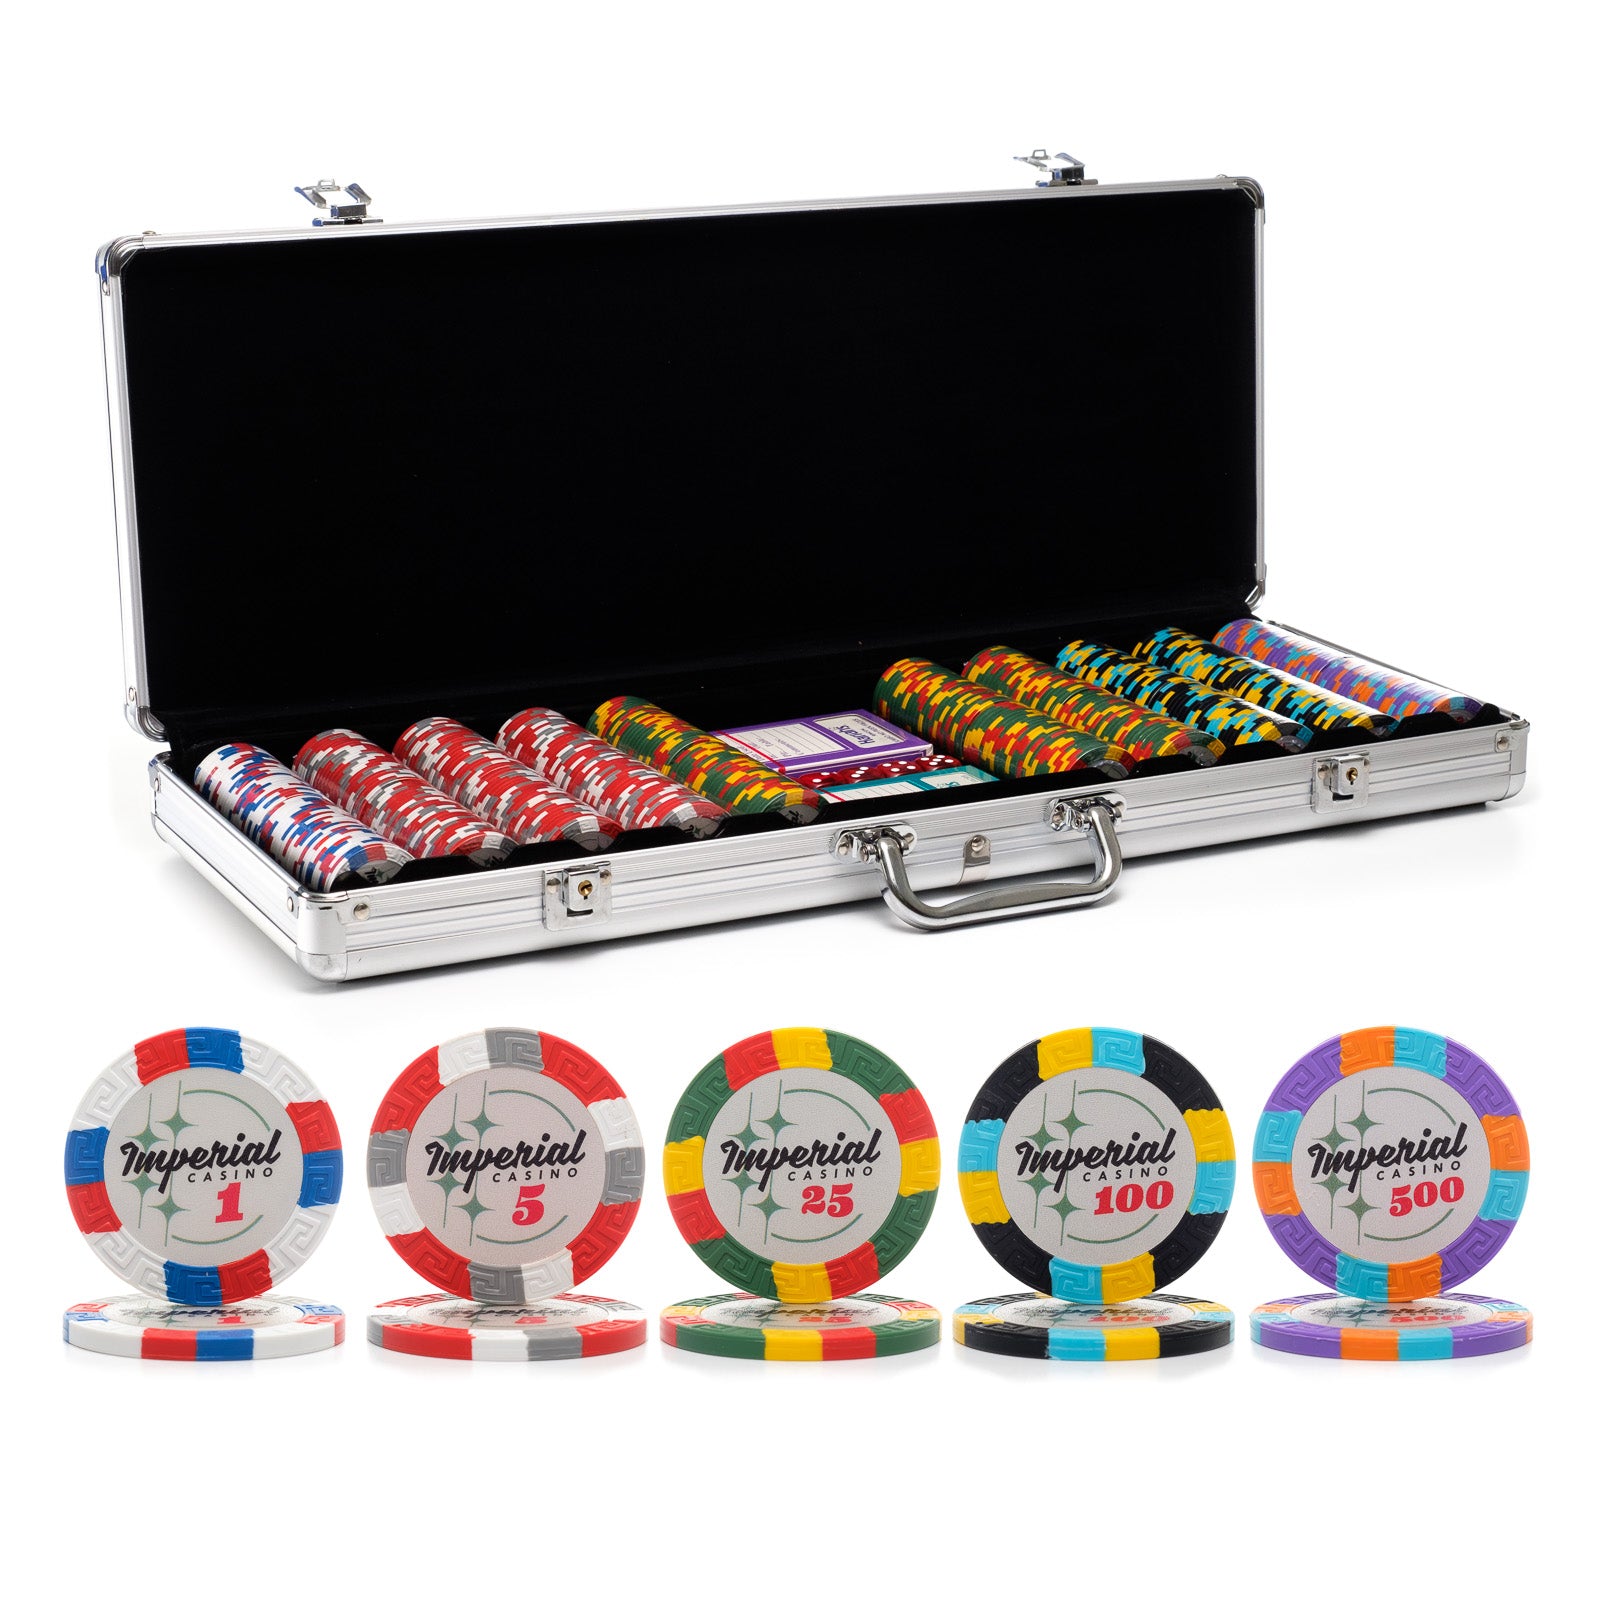 500 pc. 13g Imperial Poker Chip Set with Aluminum Case